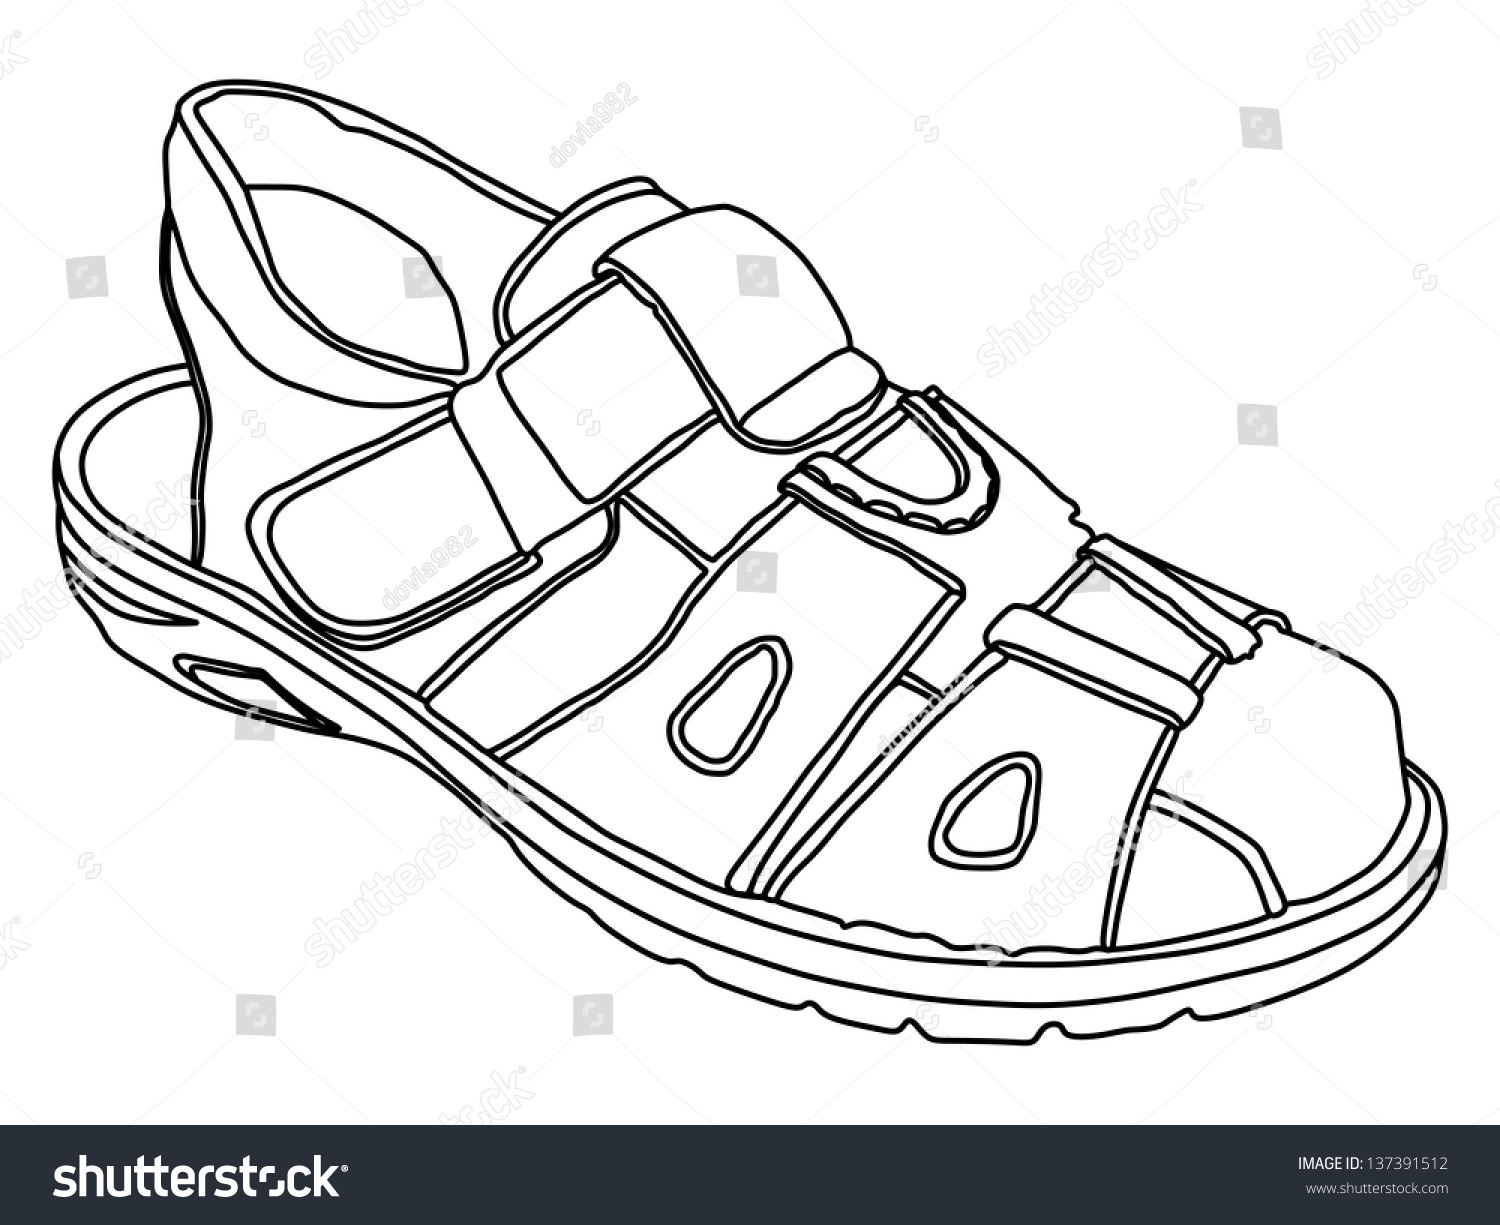 A Fashionable Shot Of A Pair Of Males Leather Sandals Isolated On White ...